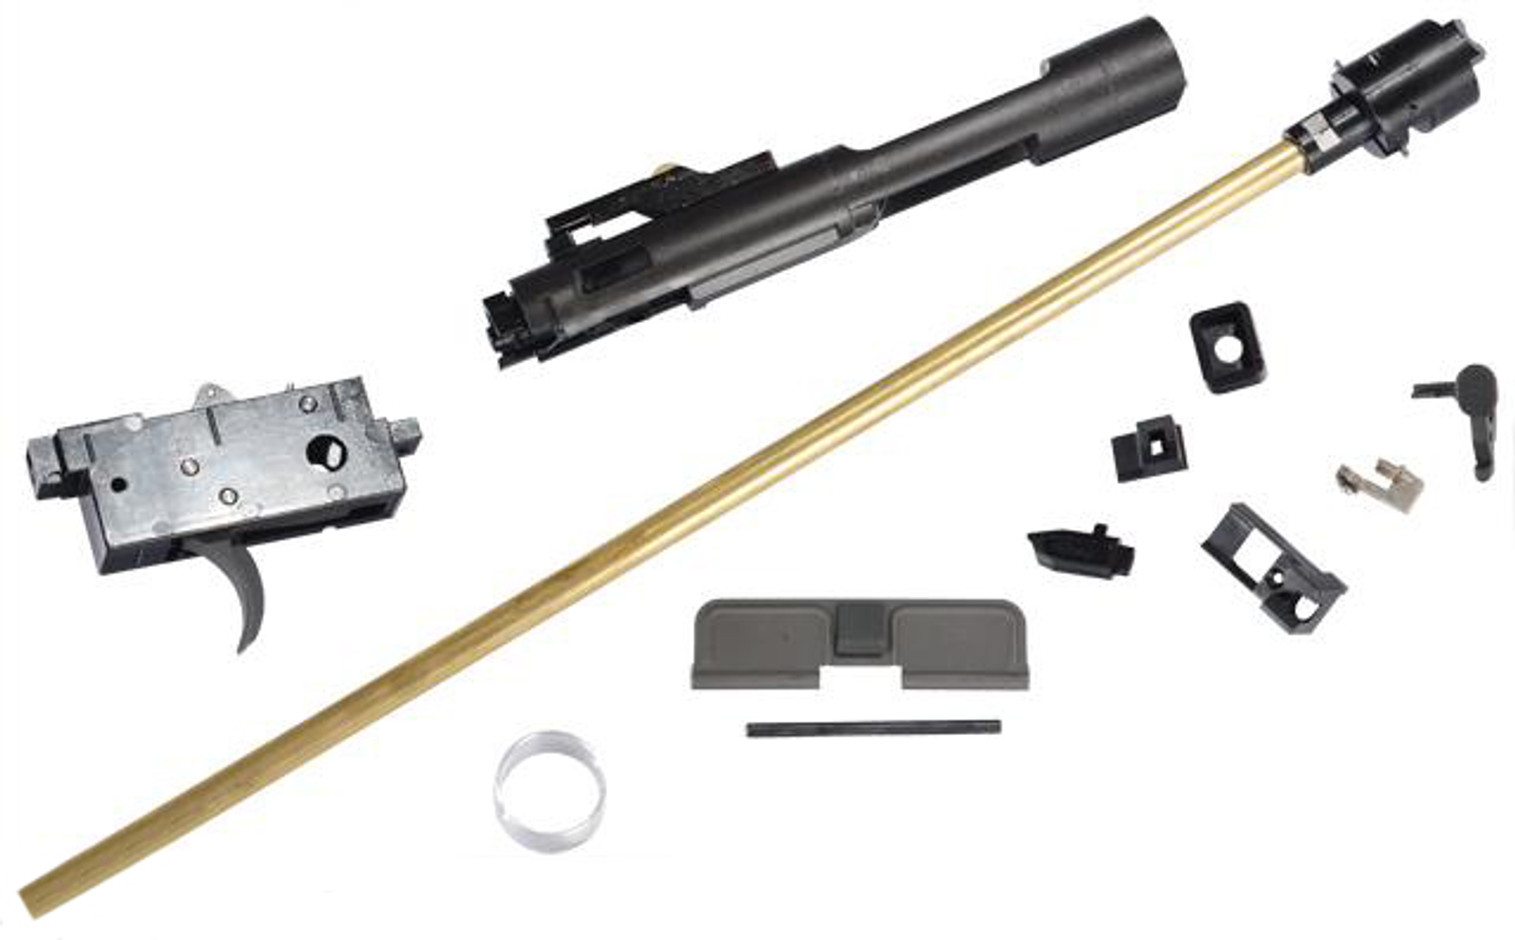 WE "Open Bolt System" Complete Conversion Kit for WE M4 Airsoft GBB Rifle